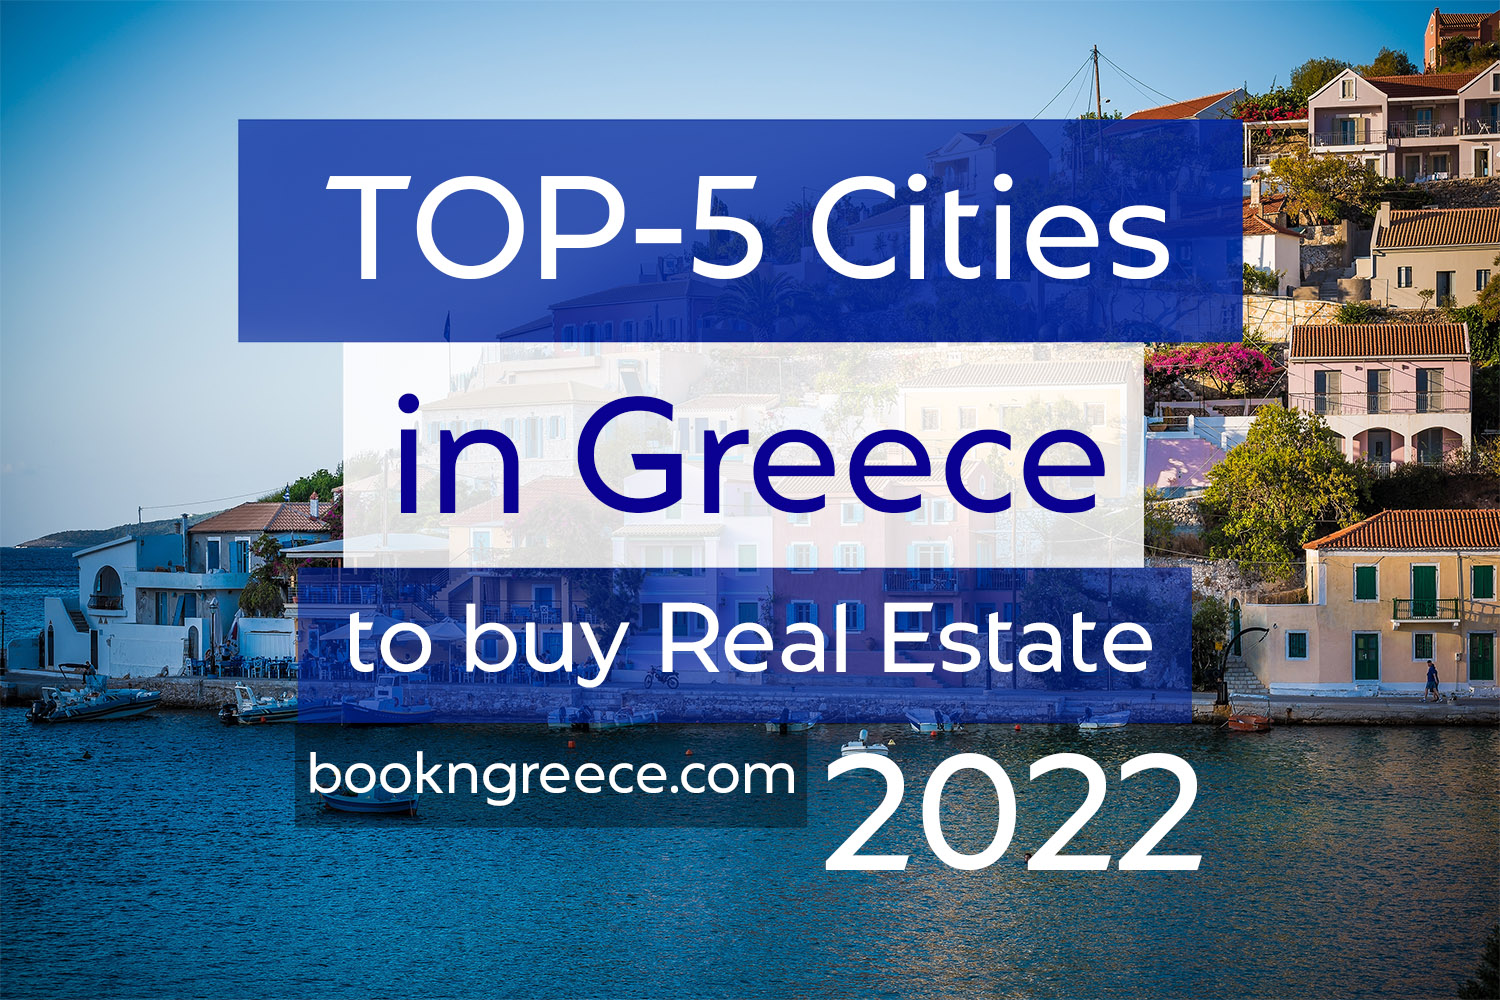 Top 5 cities in Greece to buy real estate 2022 - Bookn Greece